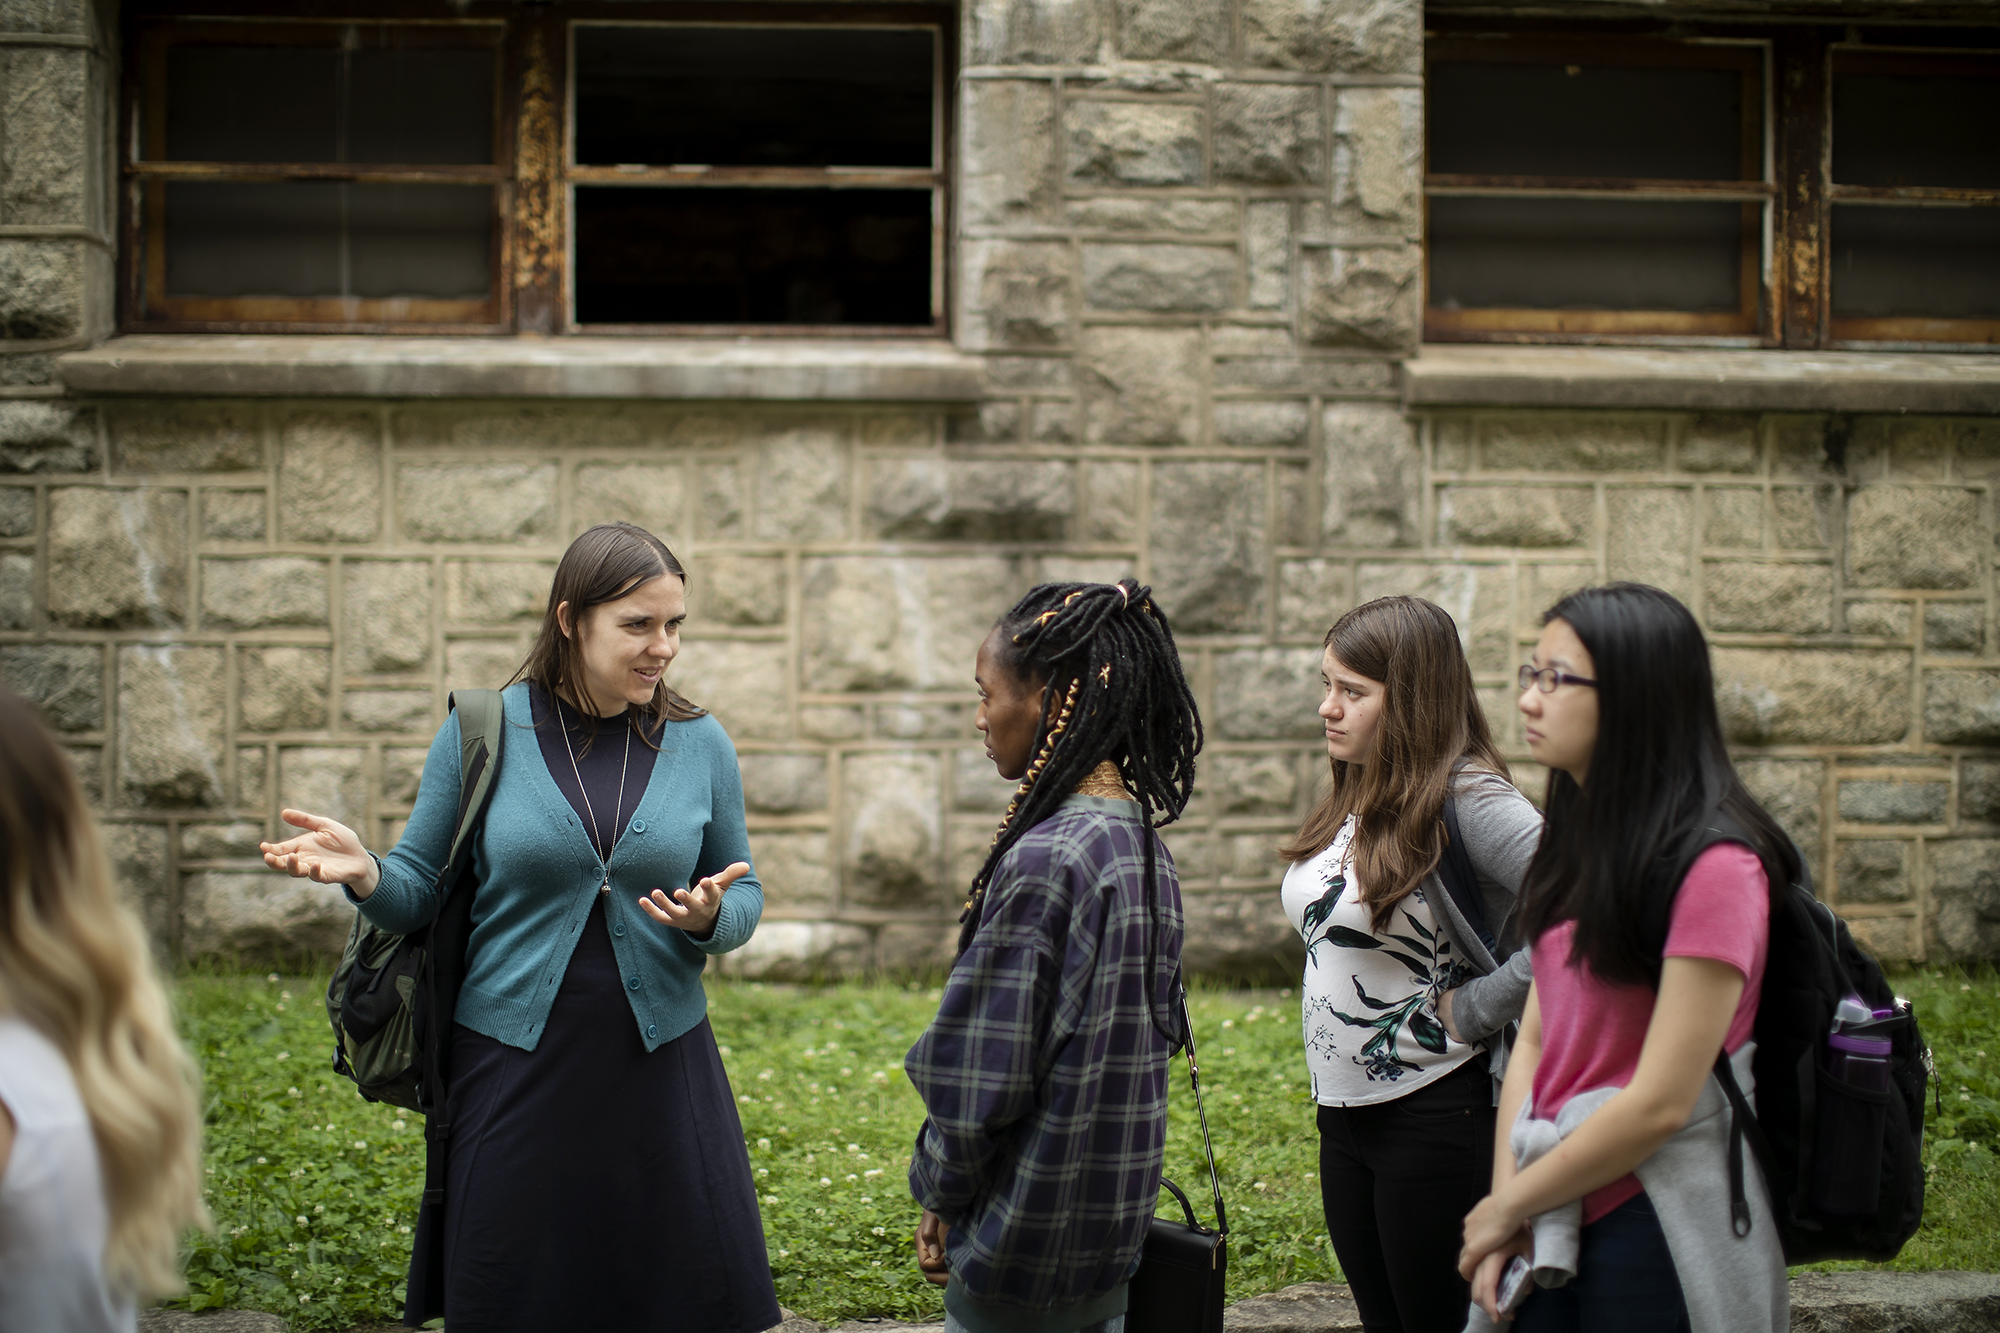 Penn criminologist Aurelie Ouss (in green) discussed her research during the mindCORE workshop and visited Eastern State with the group of students.